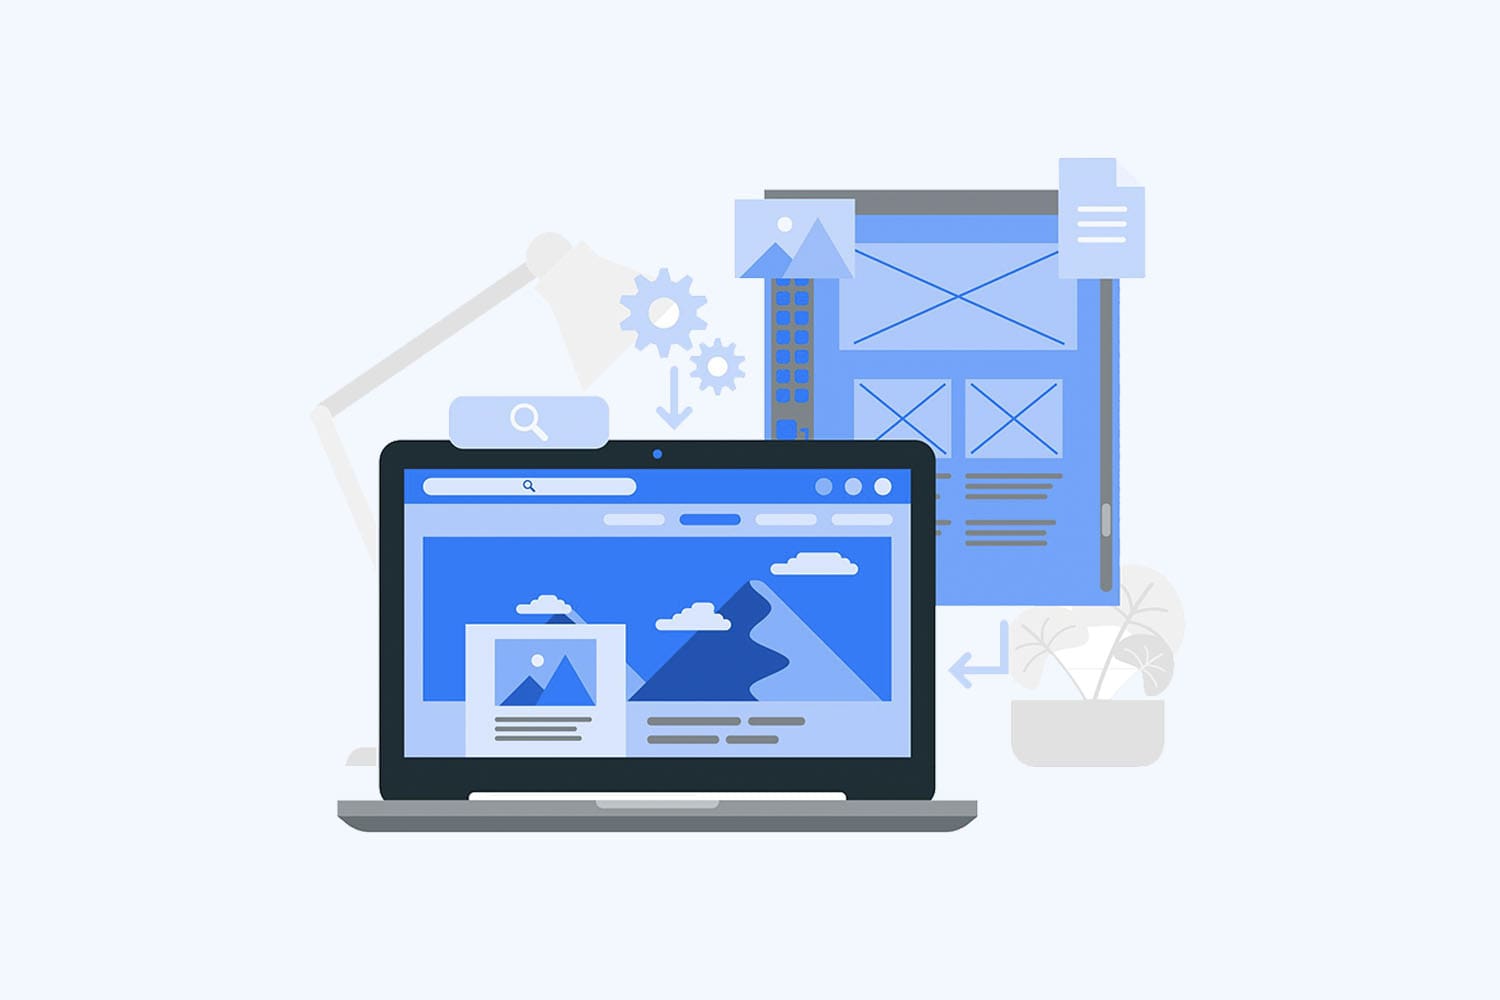 Illustration of a web development concept with a laptop displaying a webpage layout, flanked by related icons such as a task checklist and email.